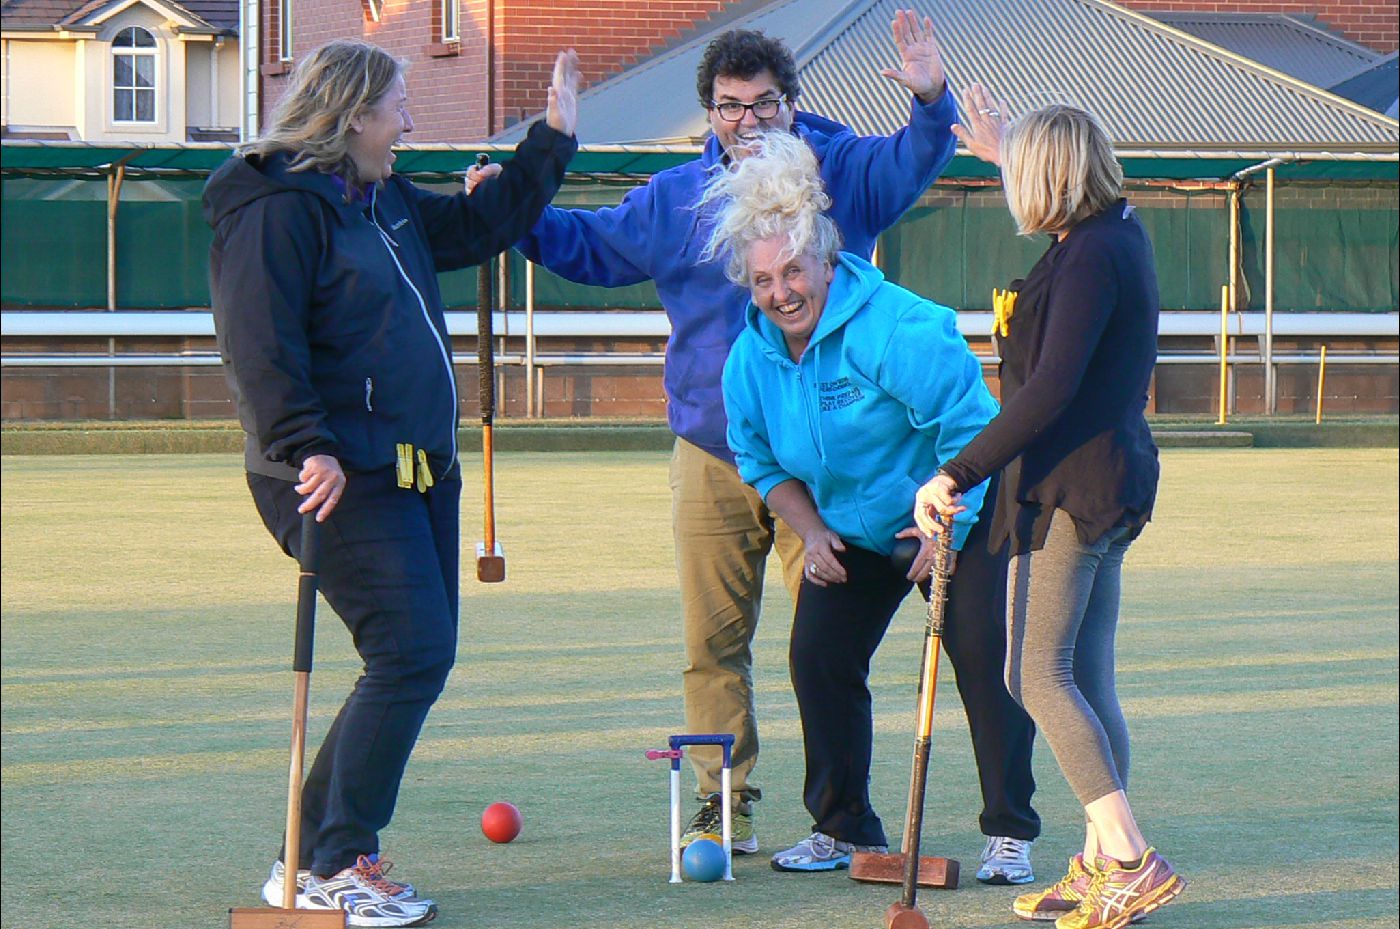 Croquet great to play